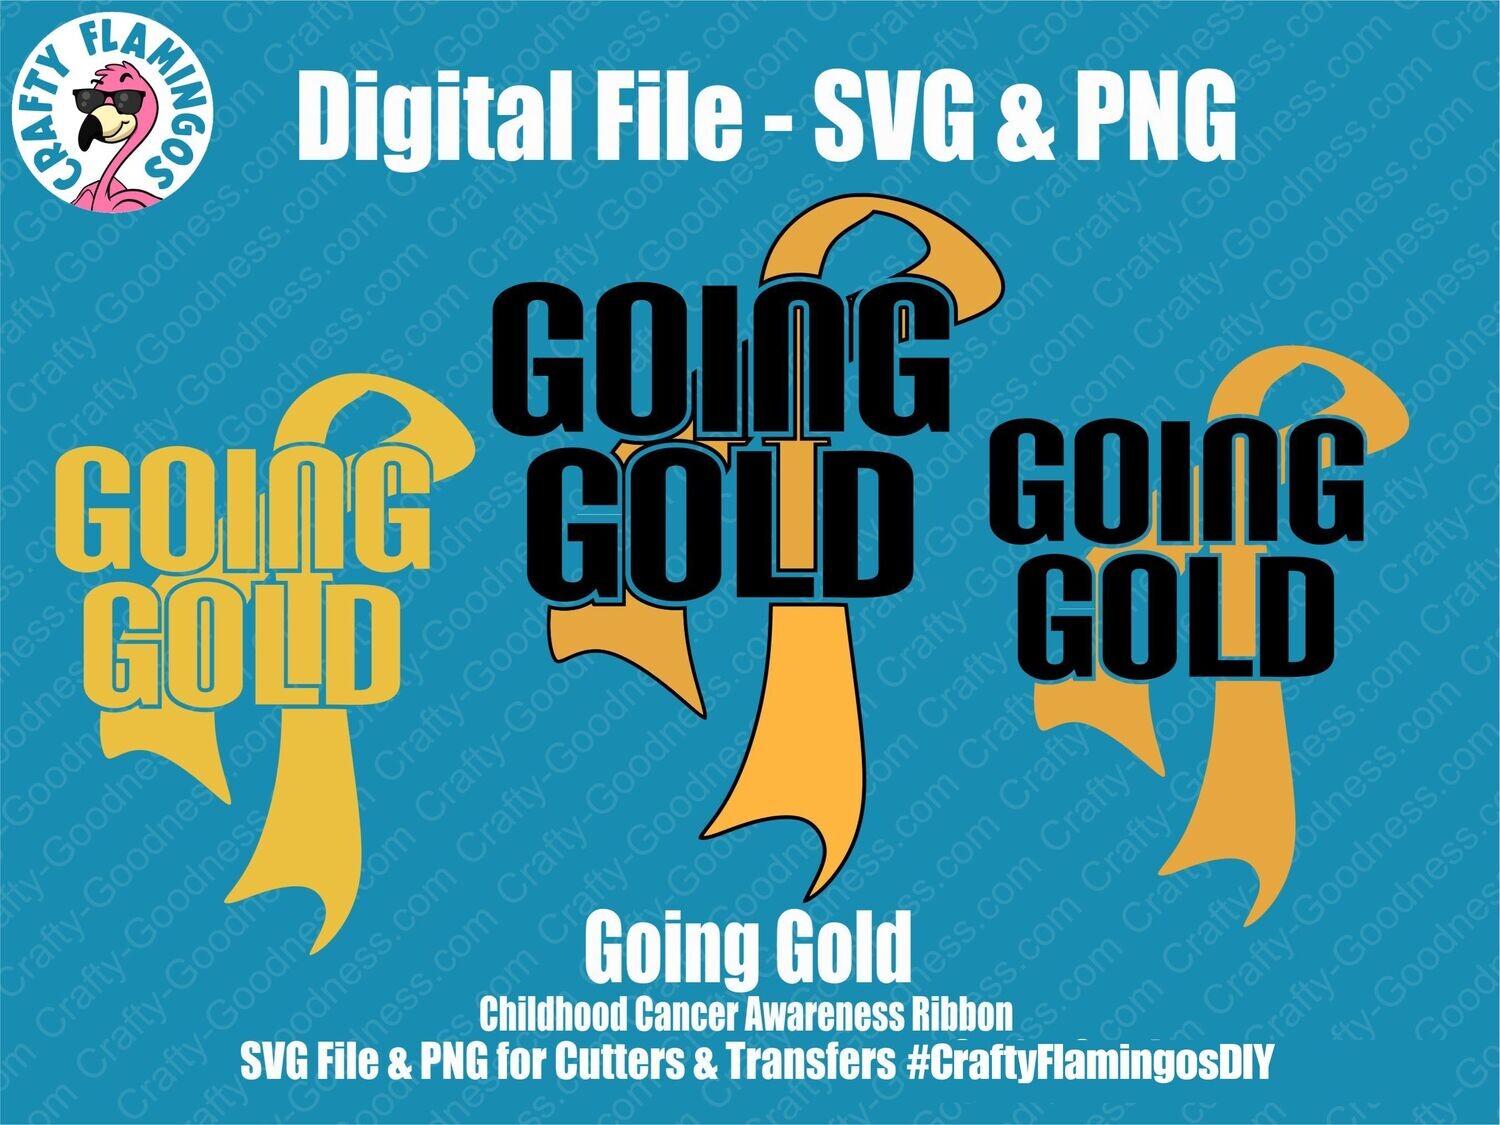 Going Gold for Childhood Cancer Awareness - SVG Vector Download DIY Cut Cutting File Cricut Silhouette and PNG